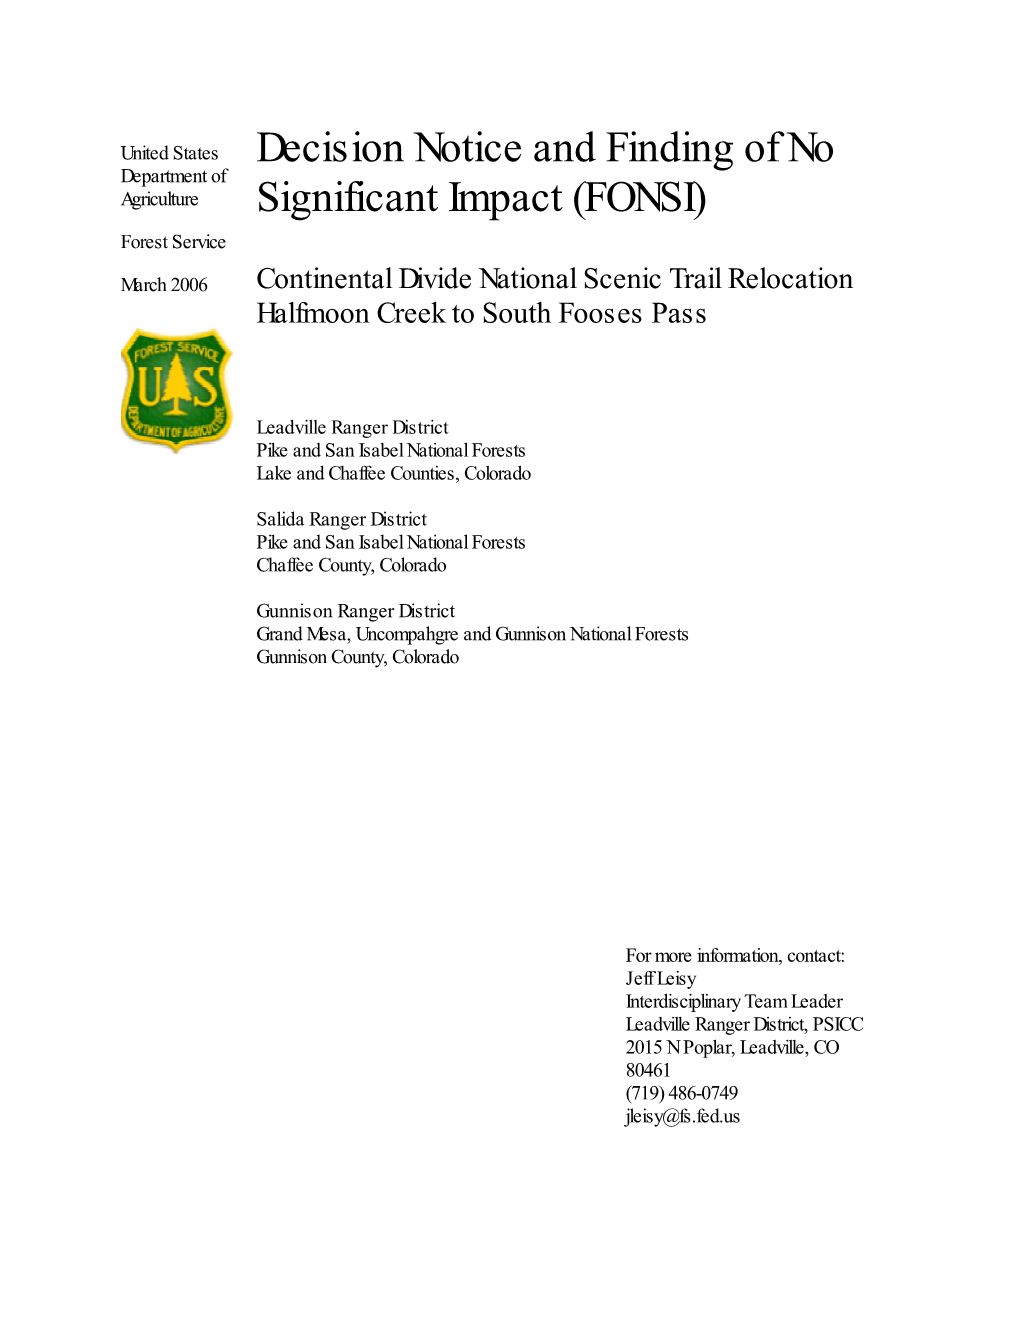 Decision Notice and Finding of No Significant Impact (FONSI)